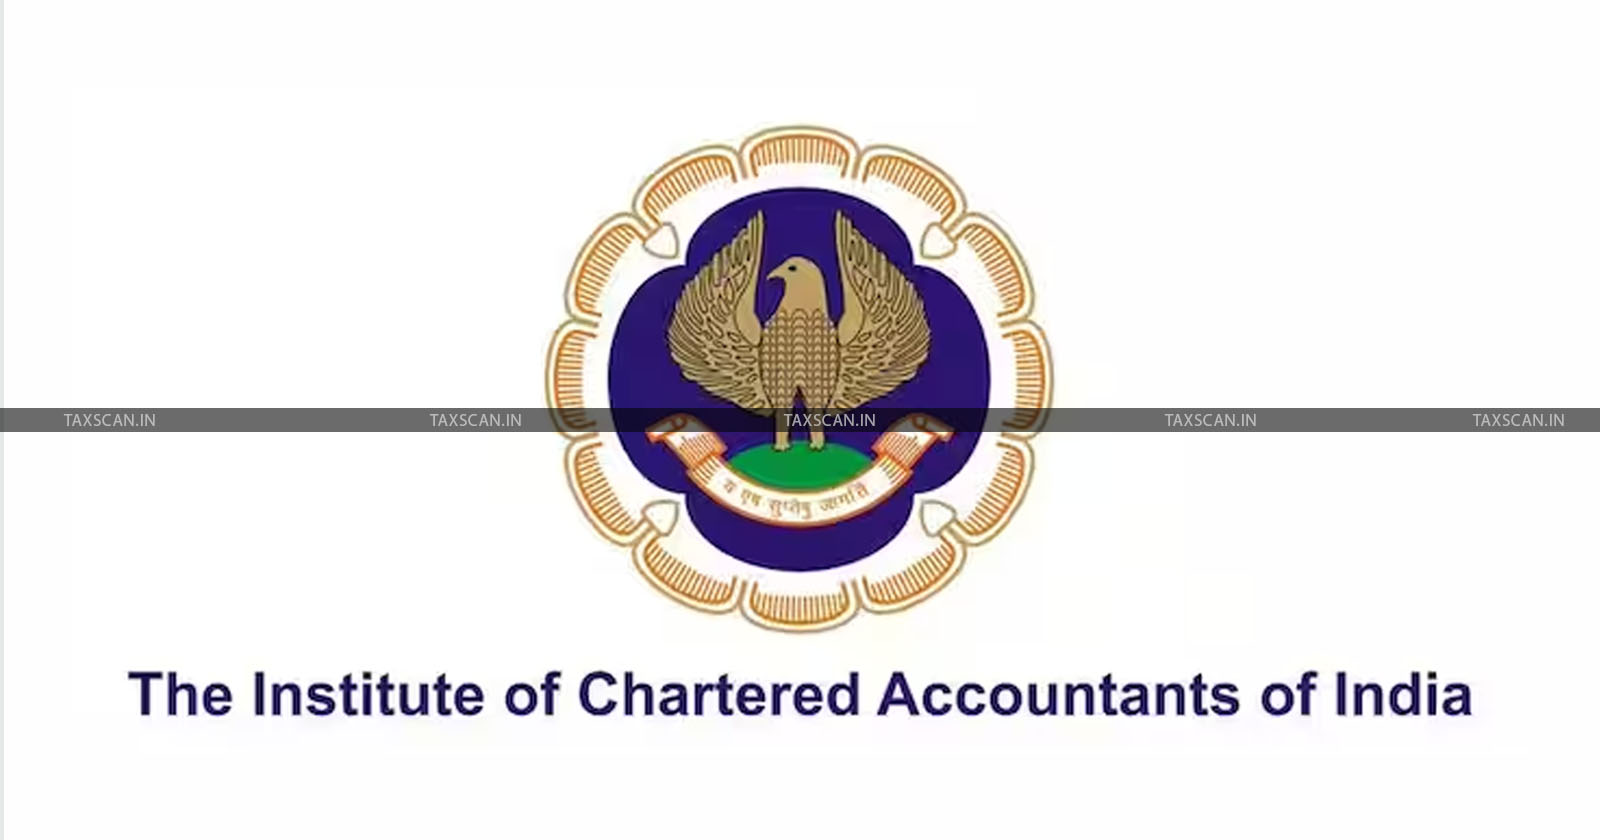 Chartered Accountant - ICAI - Ministry of Corporate Affairs - Chartered Accountants Act review - taxscan